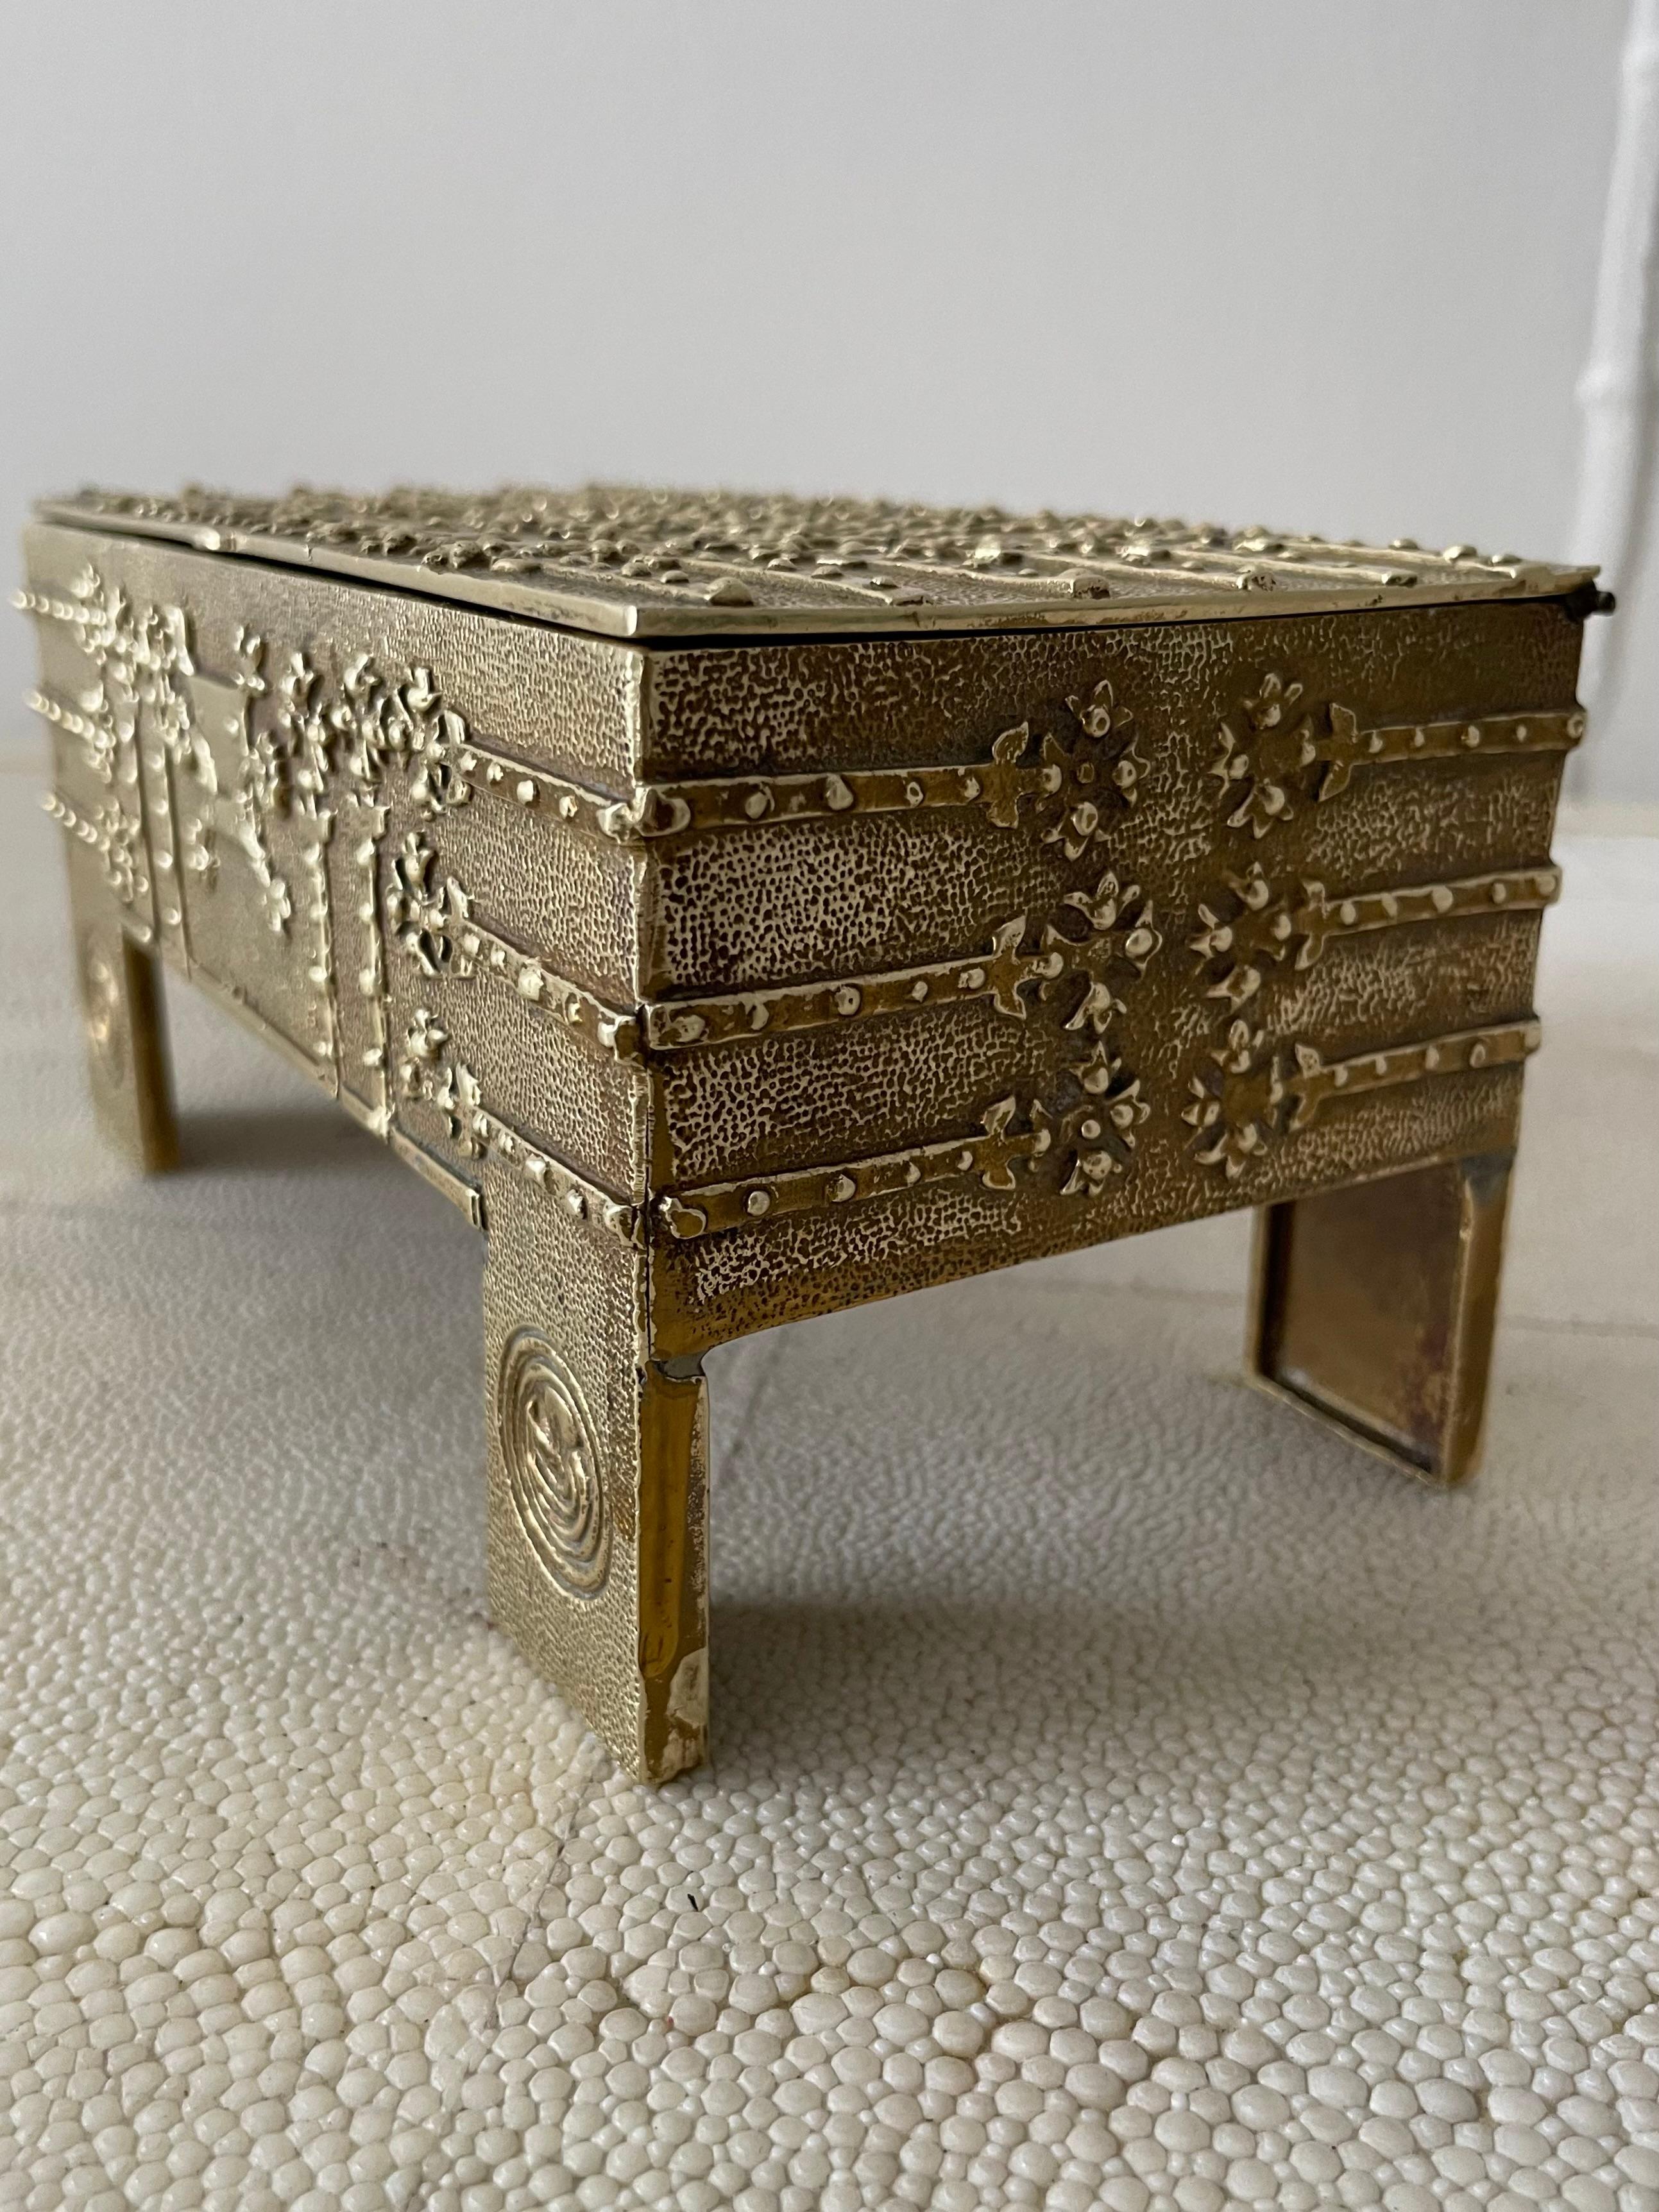 Brutalist Hammered Brass Box or Jewelry Casket For Sale 7